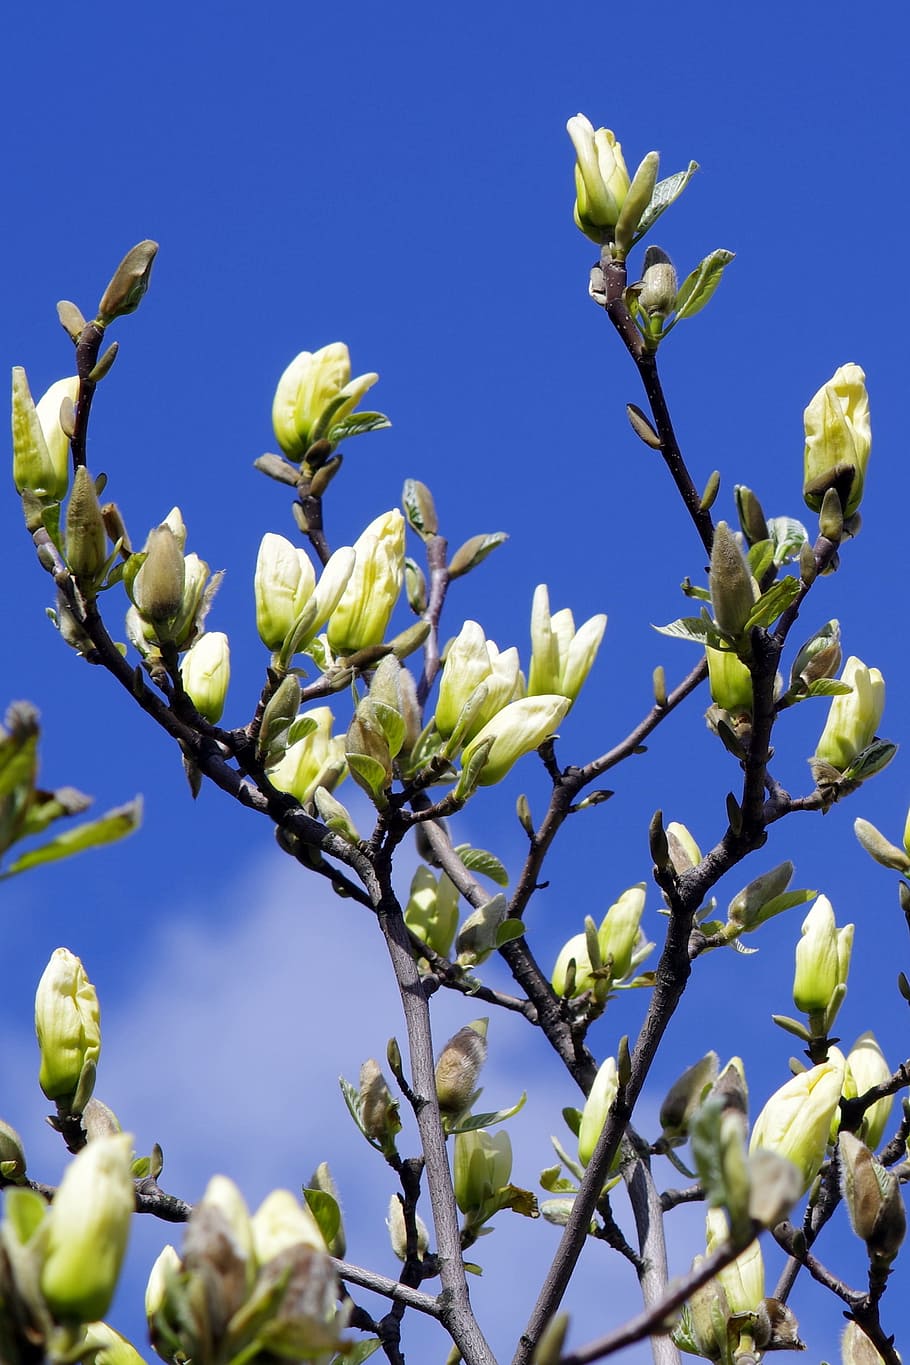 Magnolia, Buds, Yellow, Twigs, the buds, magnolia branches